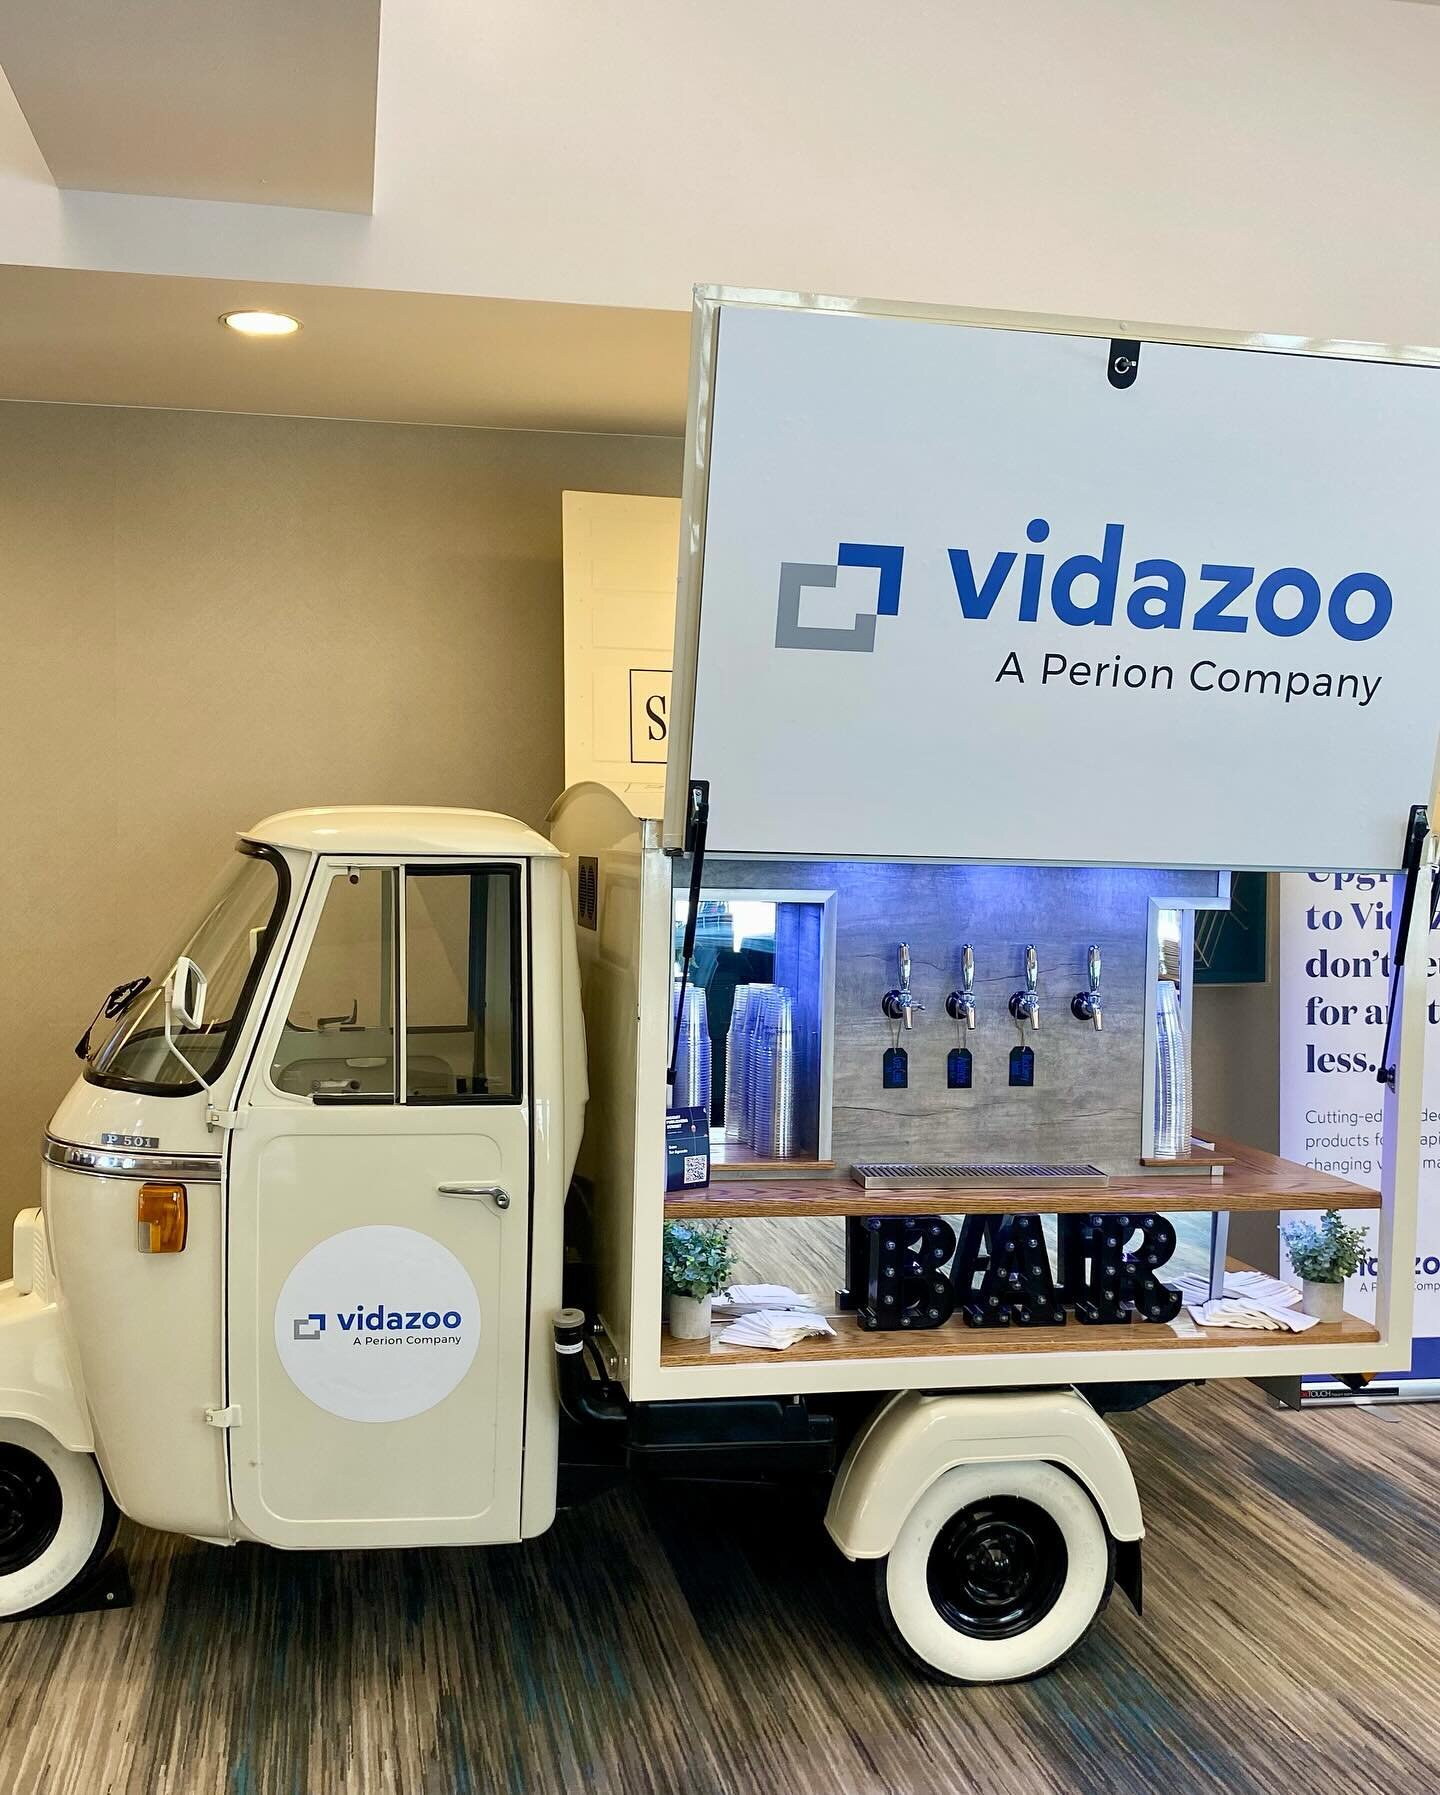 Always an amazing time at the @digiday conference with @vidazoo_video. Thanks again for having us! 🍻🥂

#mobilebar #mobilebartender #privateevents #getcozyvintagemobliebars #bubblesandbrews #cocktails #bartender #denver #bar #events #drinks #party #